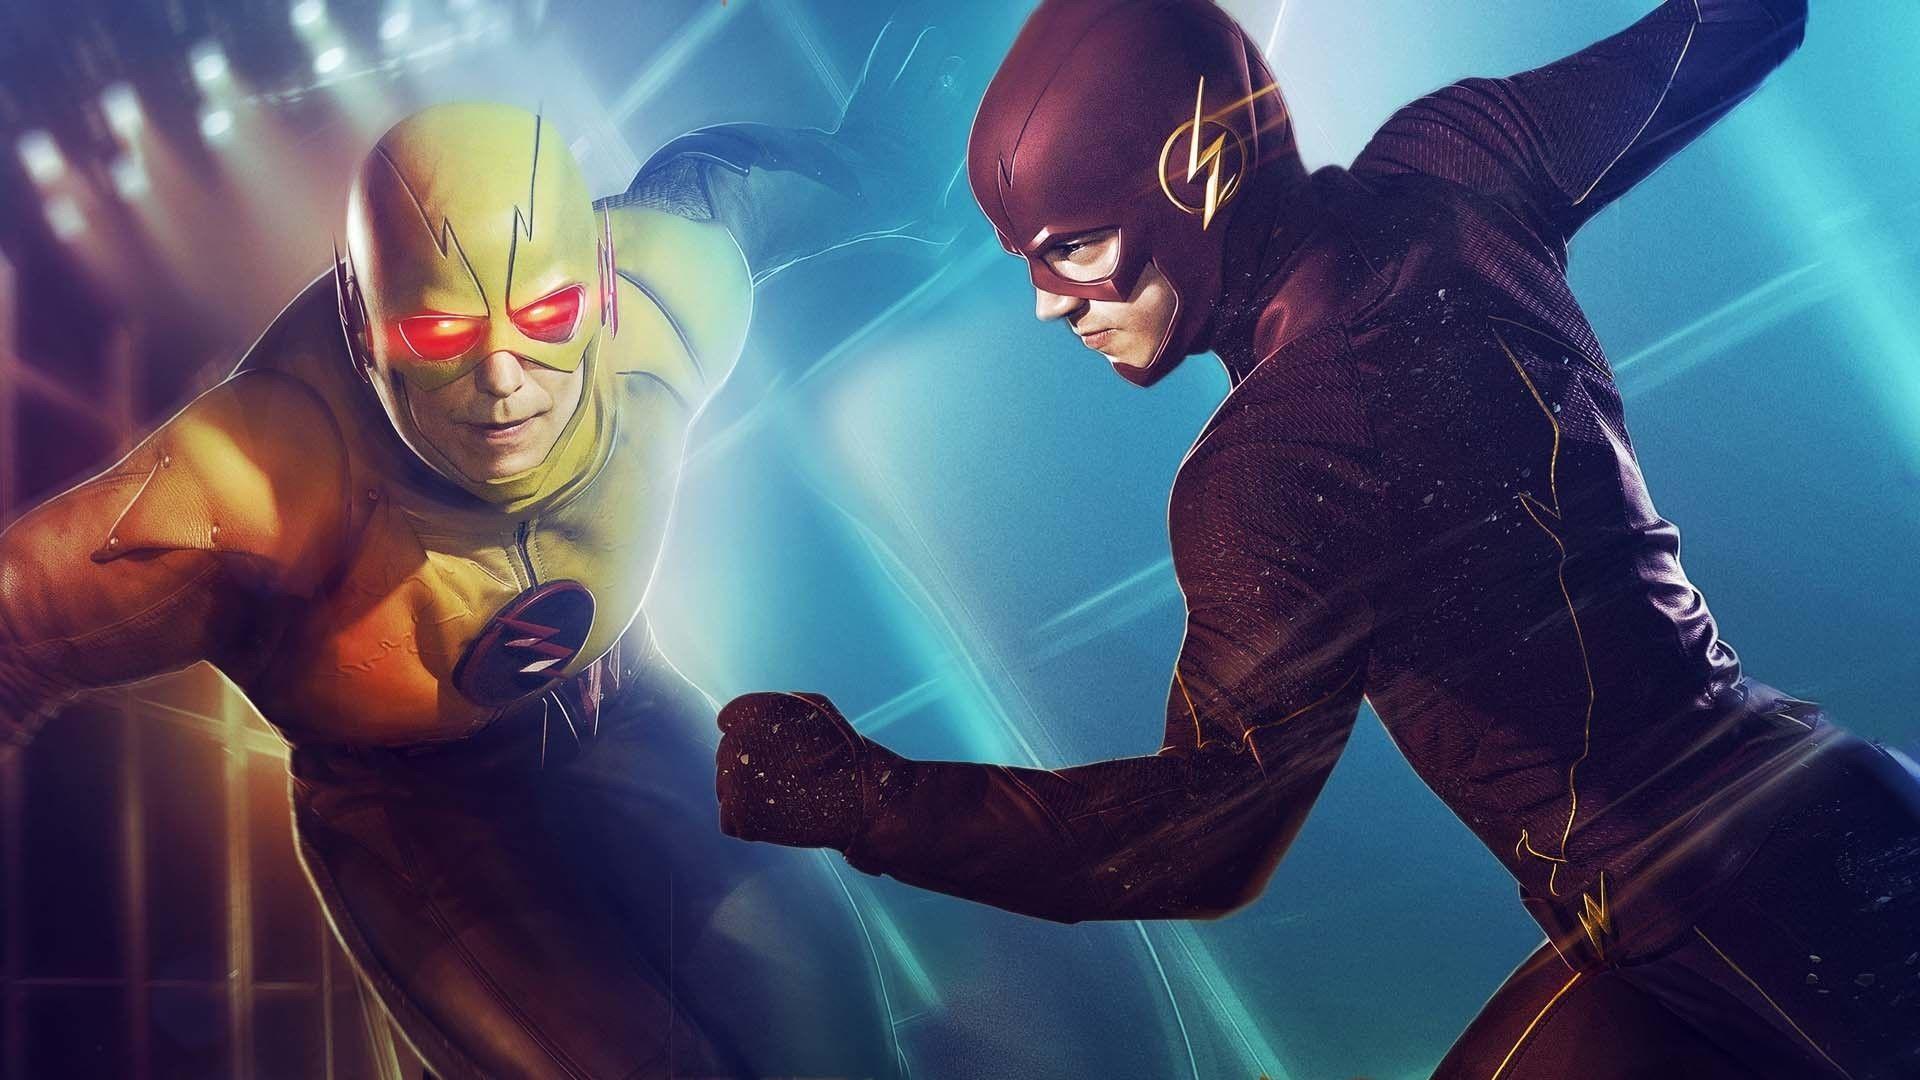 The Flash (2014) Background, Picture, Image